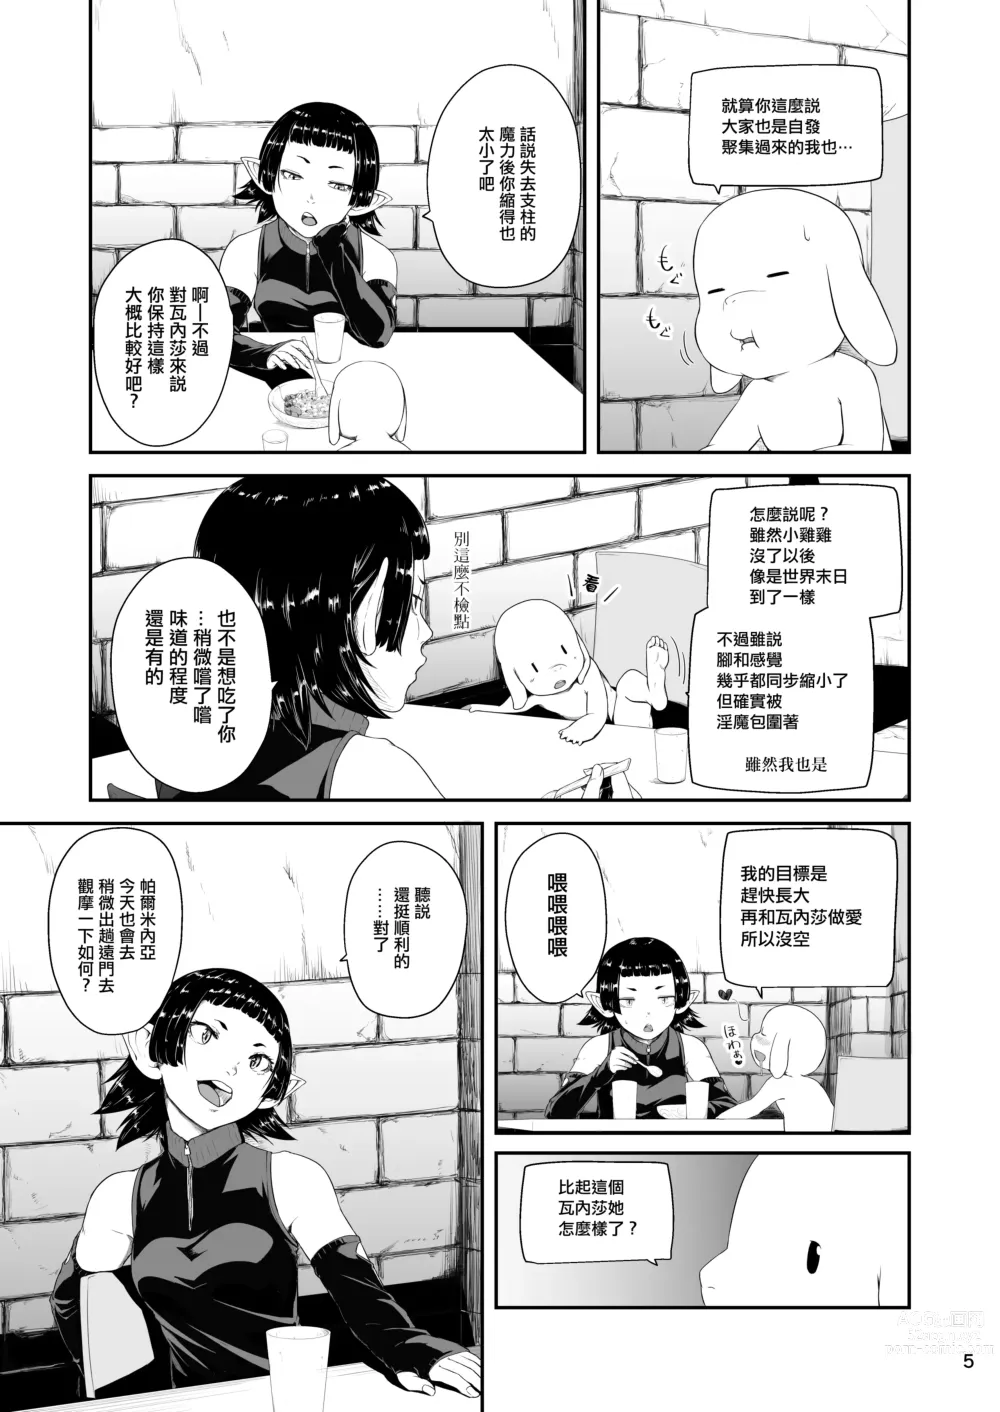 Page 6 of doujinshi 觸手訓練師! Episode 6